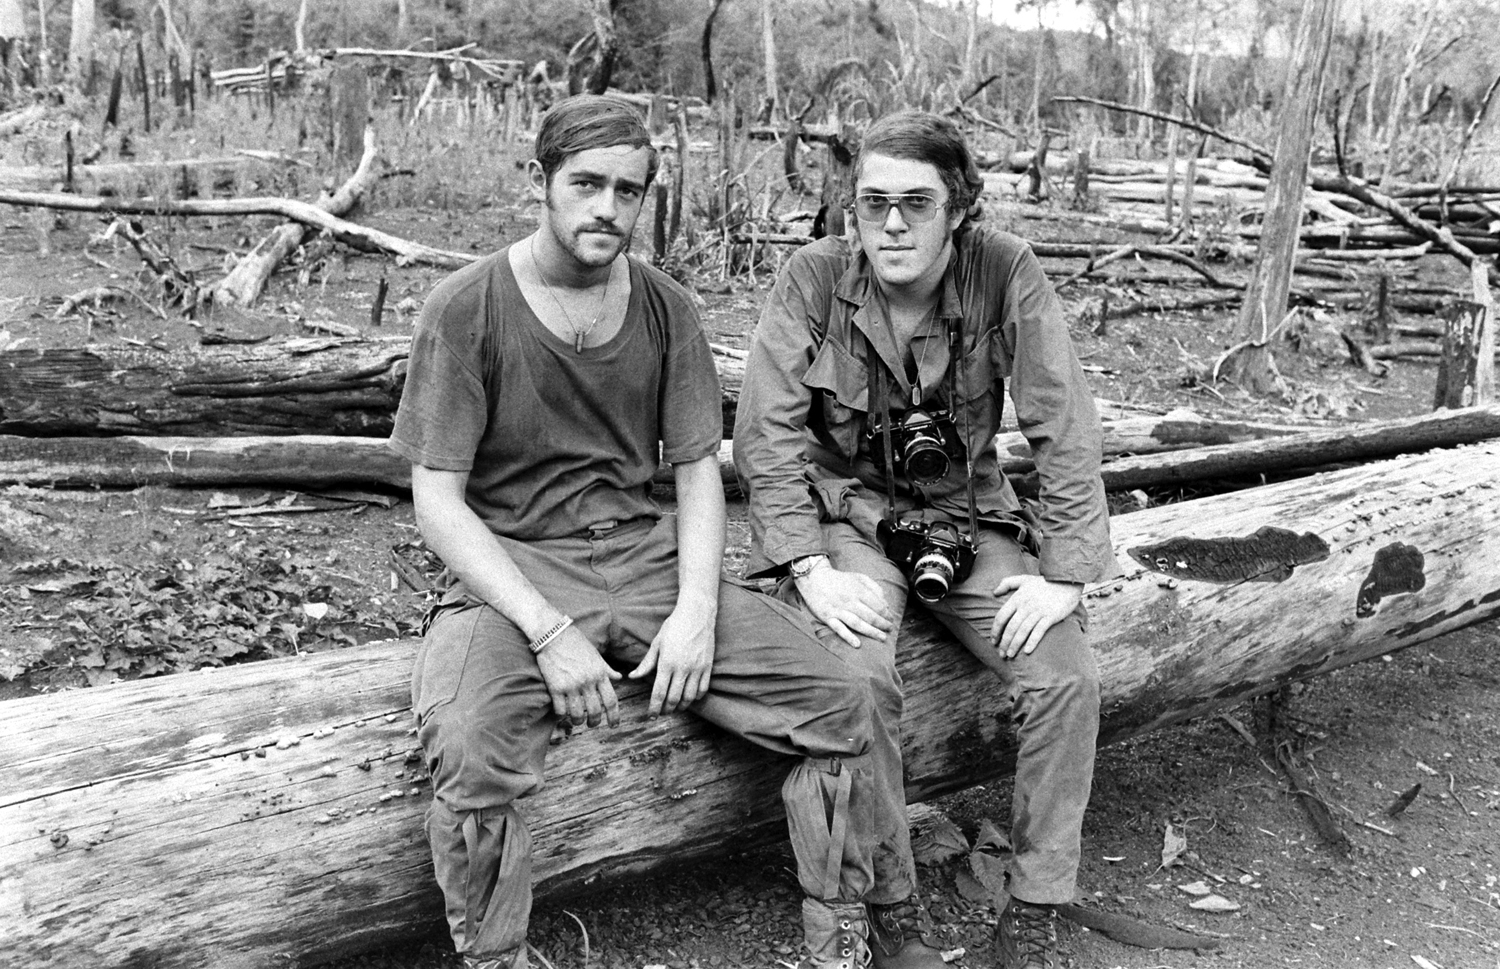 LIFE photographer John Olson (right) and Sgt. Mike Ball in Vietnam, 1971.